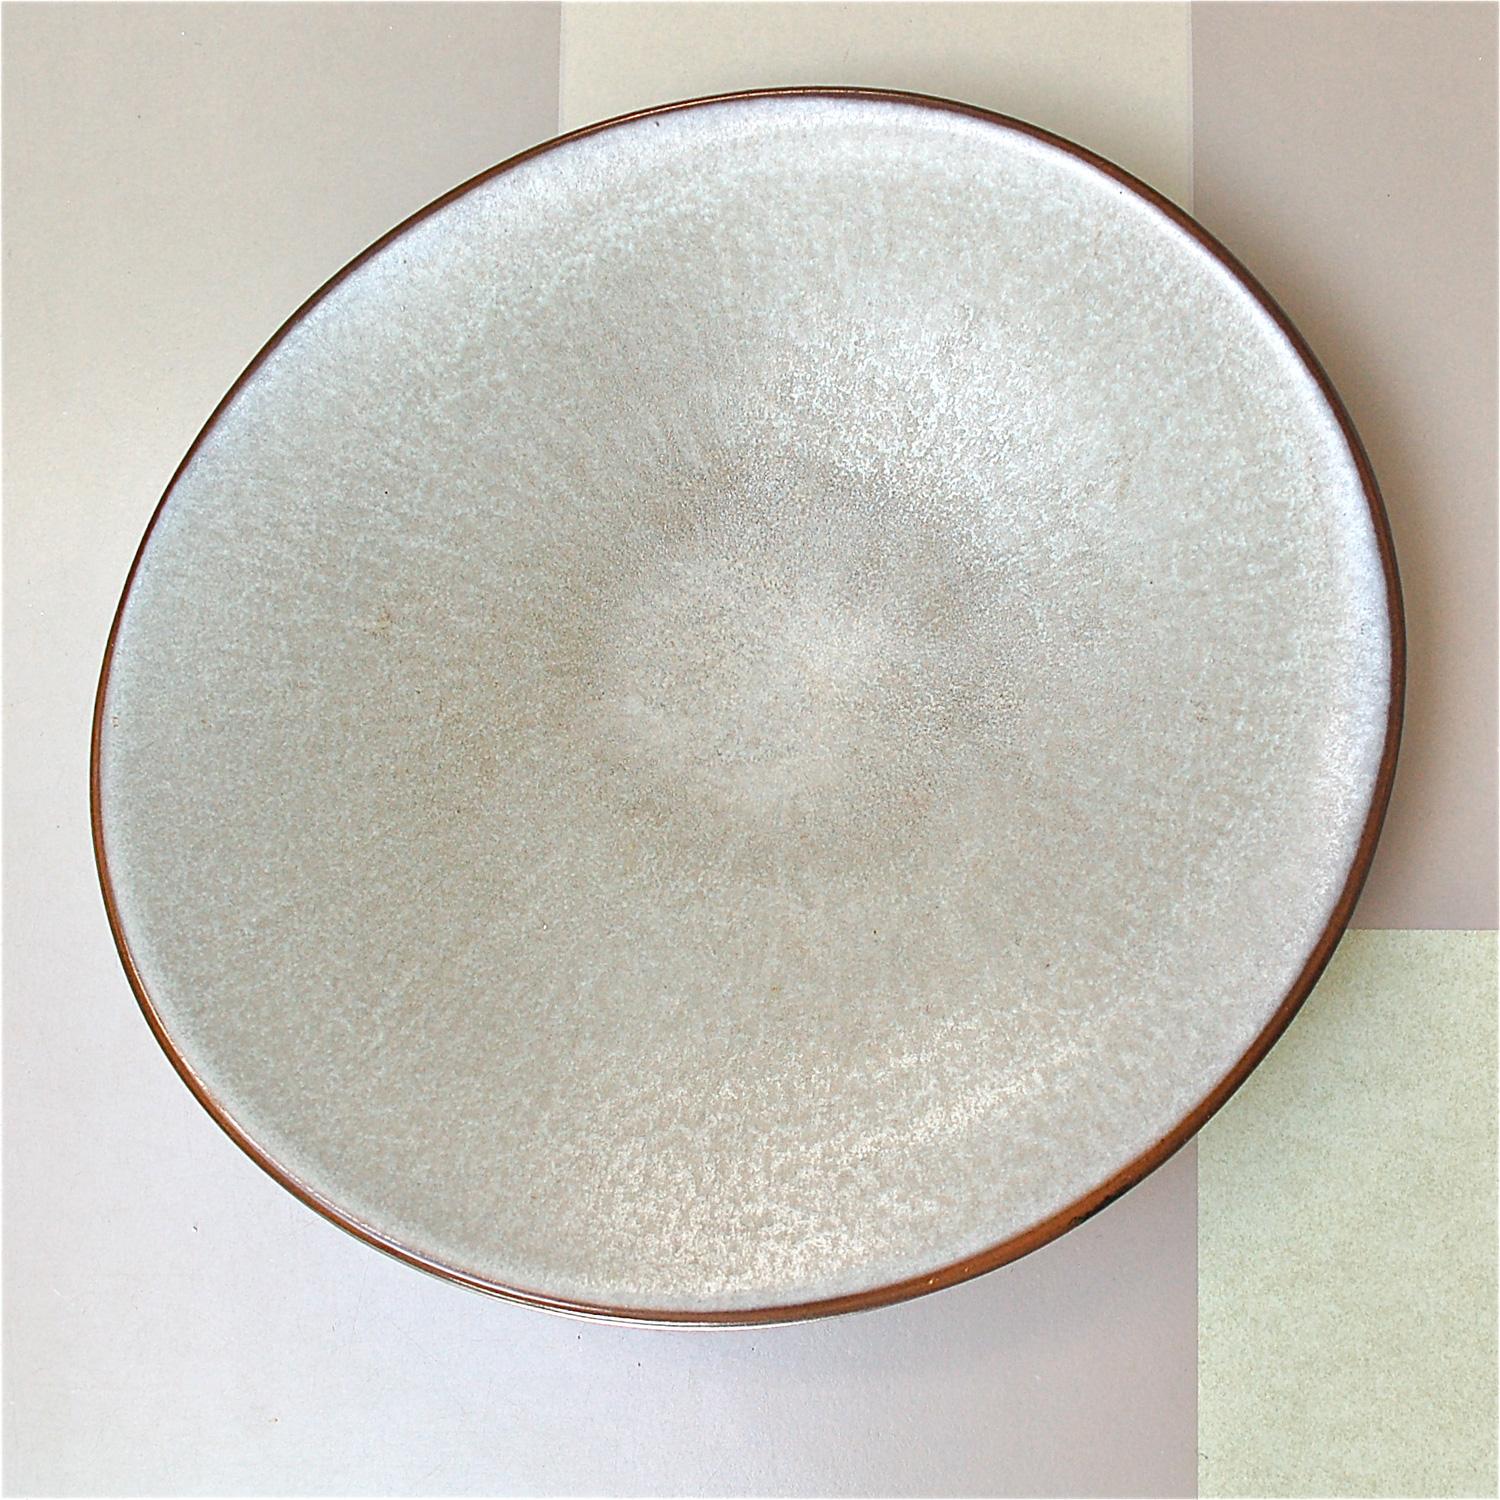 Modernist ceramic fruit bowl or dish in a distinctive asymmetrical curved design. The bowl has a light silvery and dark grey mottled finish at the top and a contrasting dark brown glaze underside. Made in the mid-20th century by German manufacturer